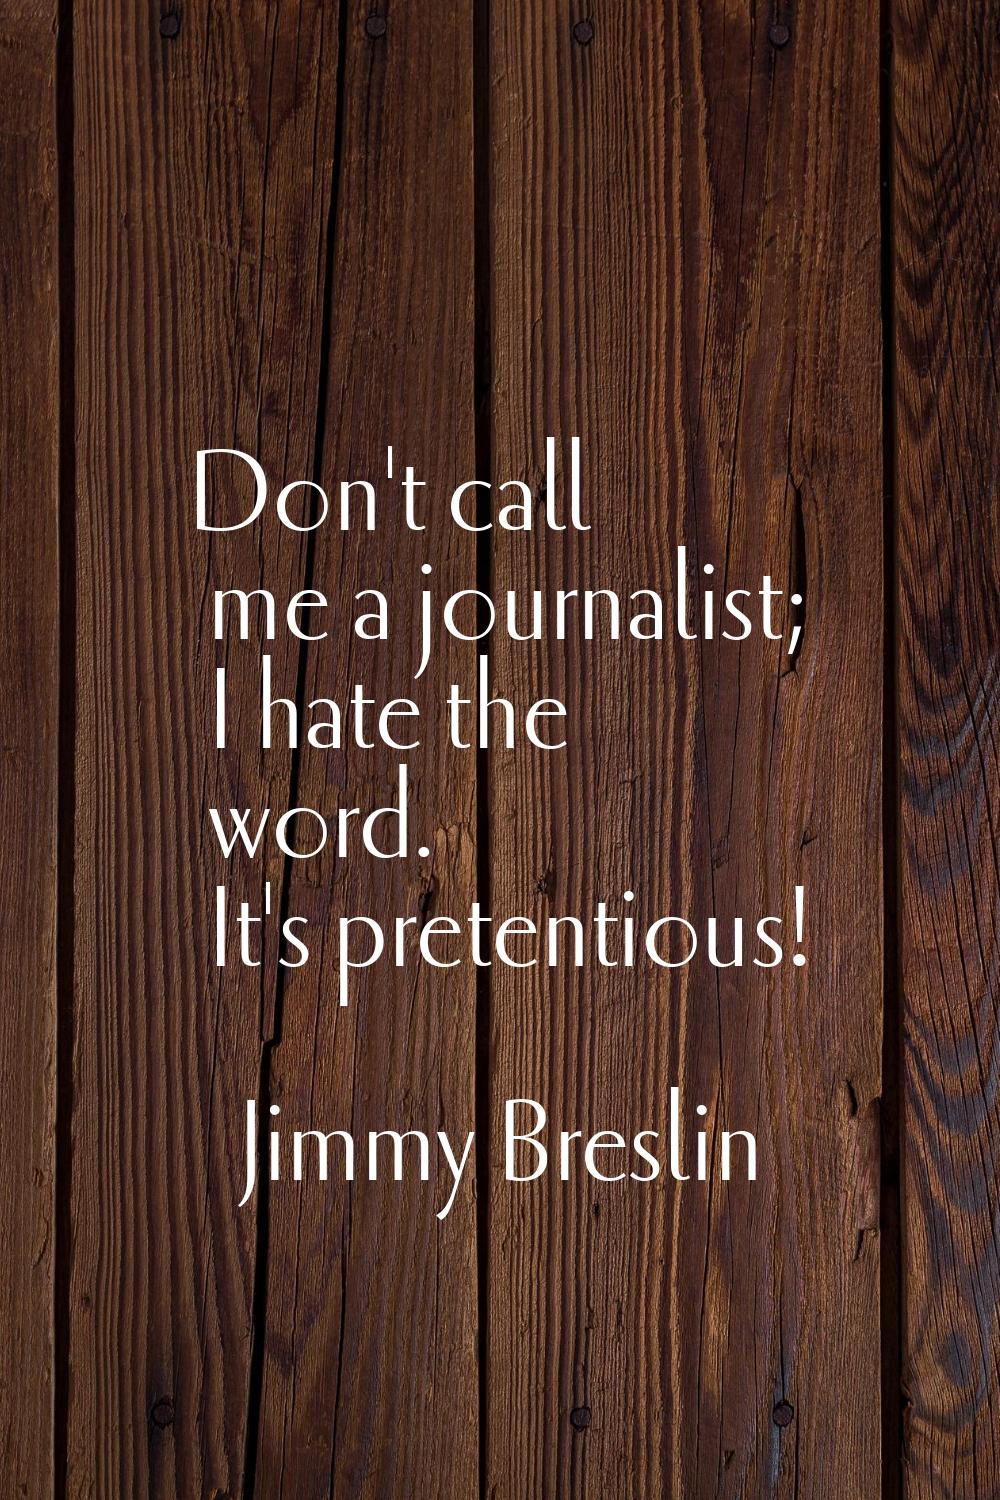 Don't call me a journalist; I hate the word. It's pretentious!